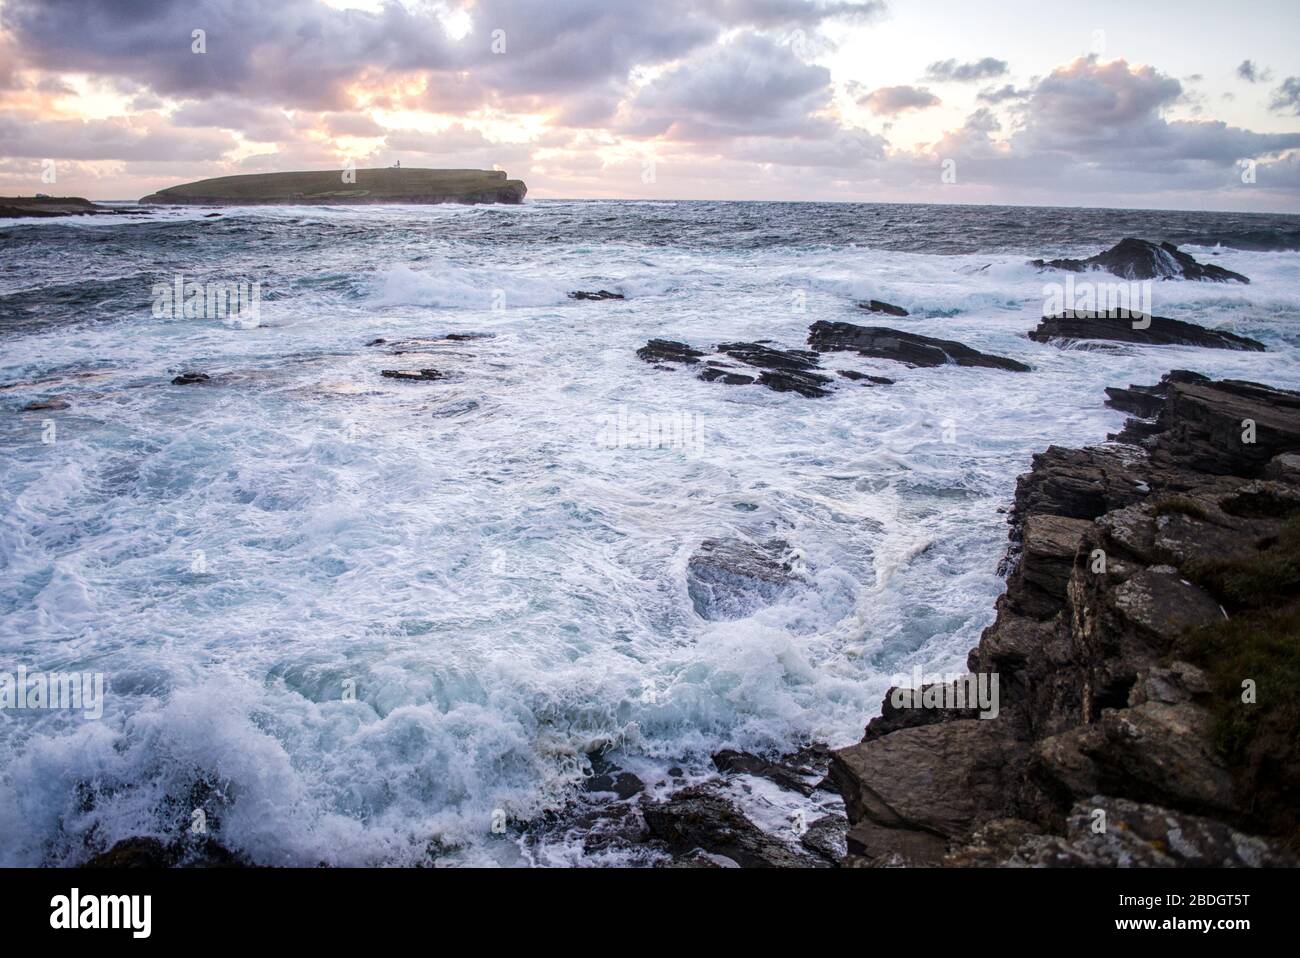 Sunset Over Coastal Landscape with Rough Waters Stock Photo